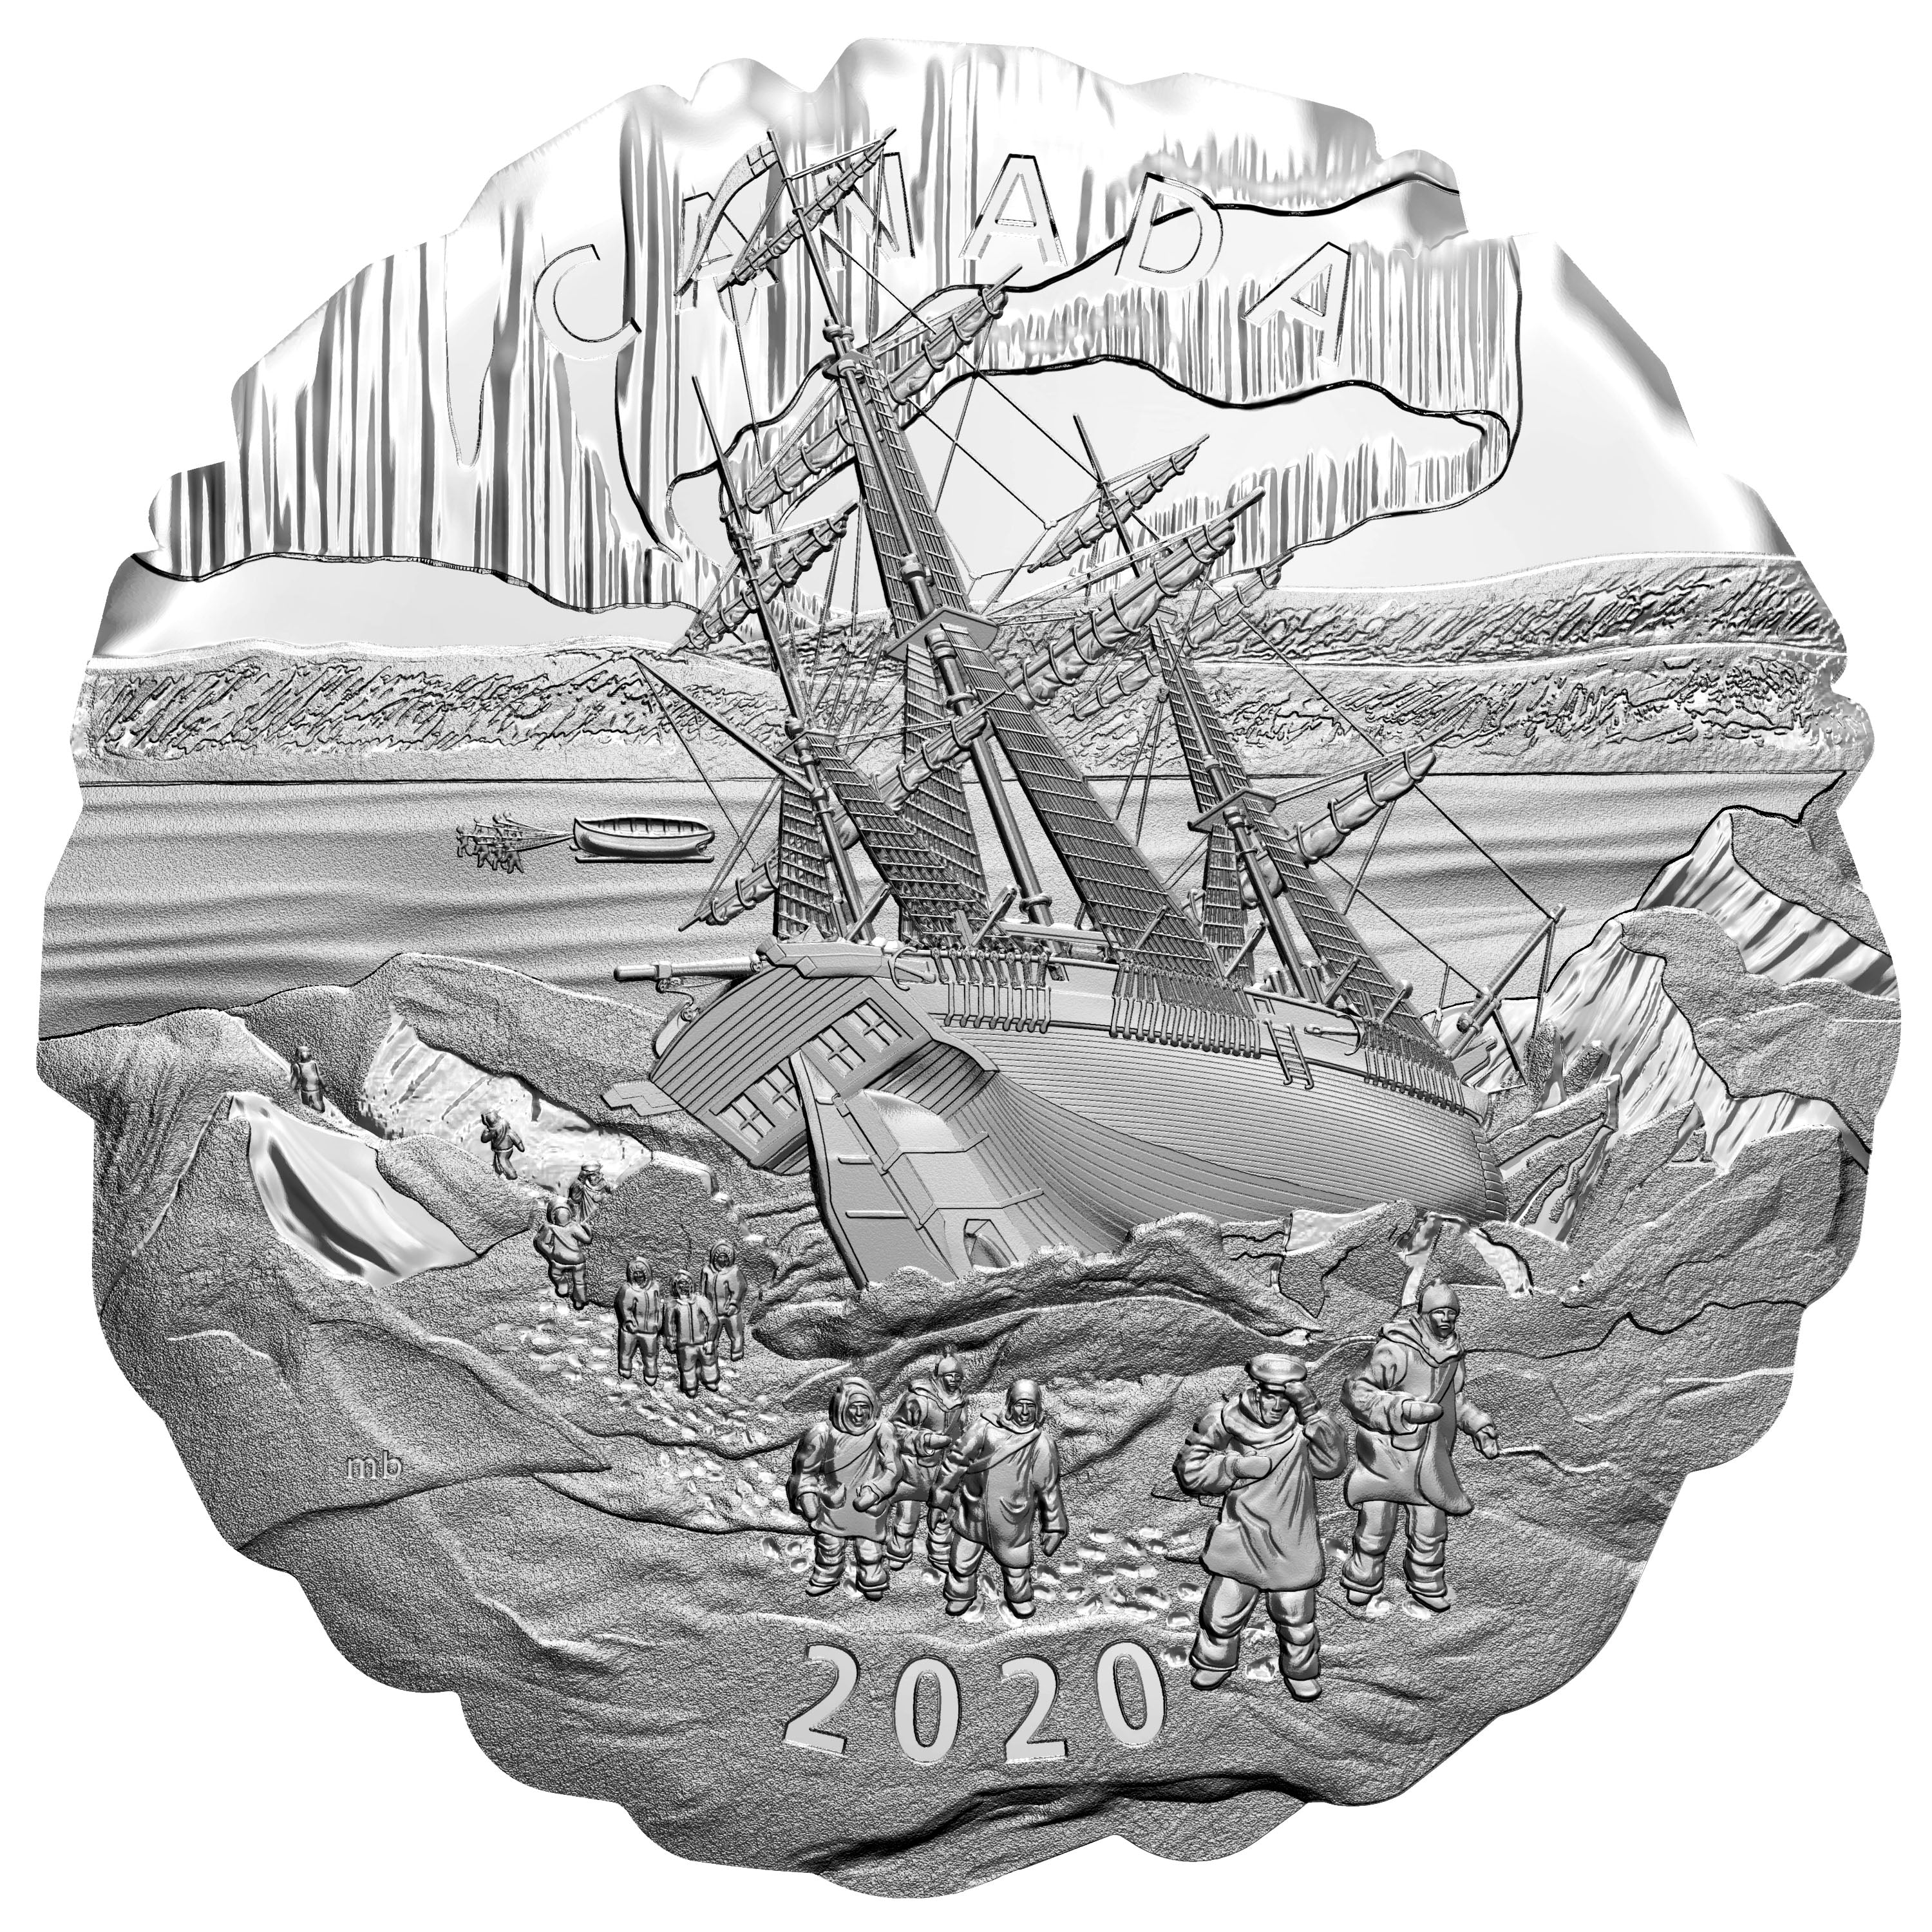 FRANKLINS LOST ARCTIC EXPEDITION Ship Silver Coin $50 Canada 2020